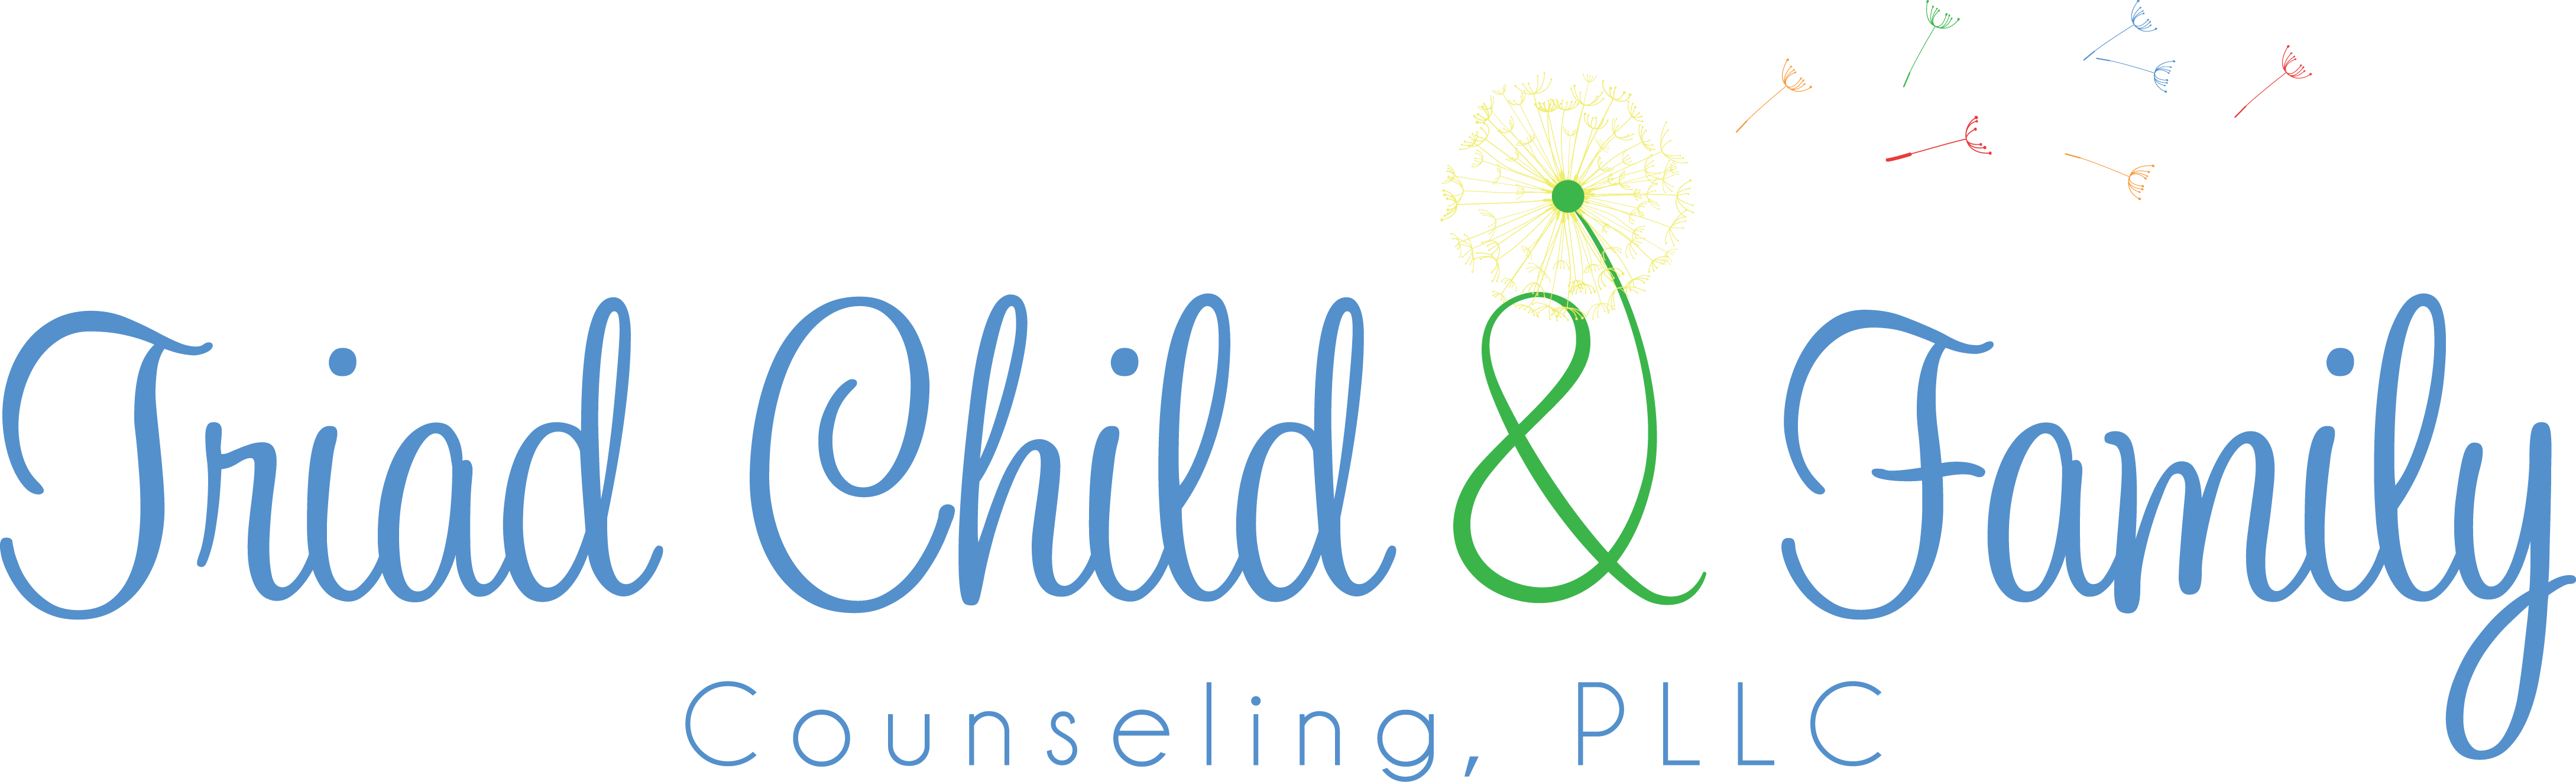 Triad Child & Family Counseling, PLLC